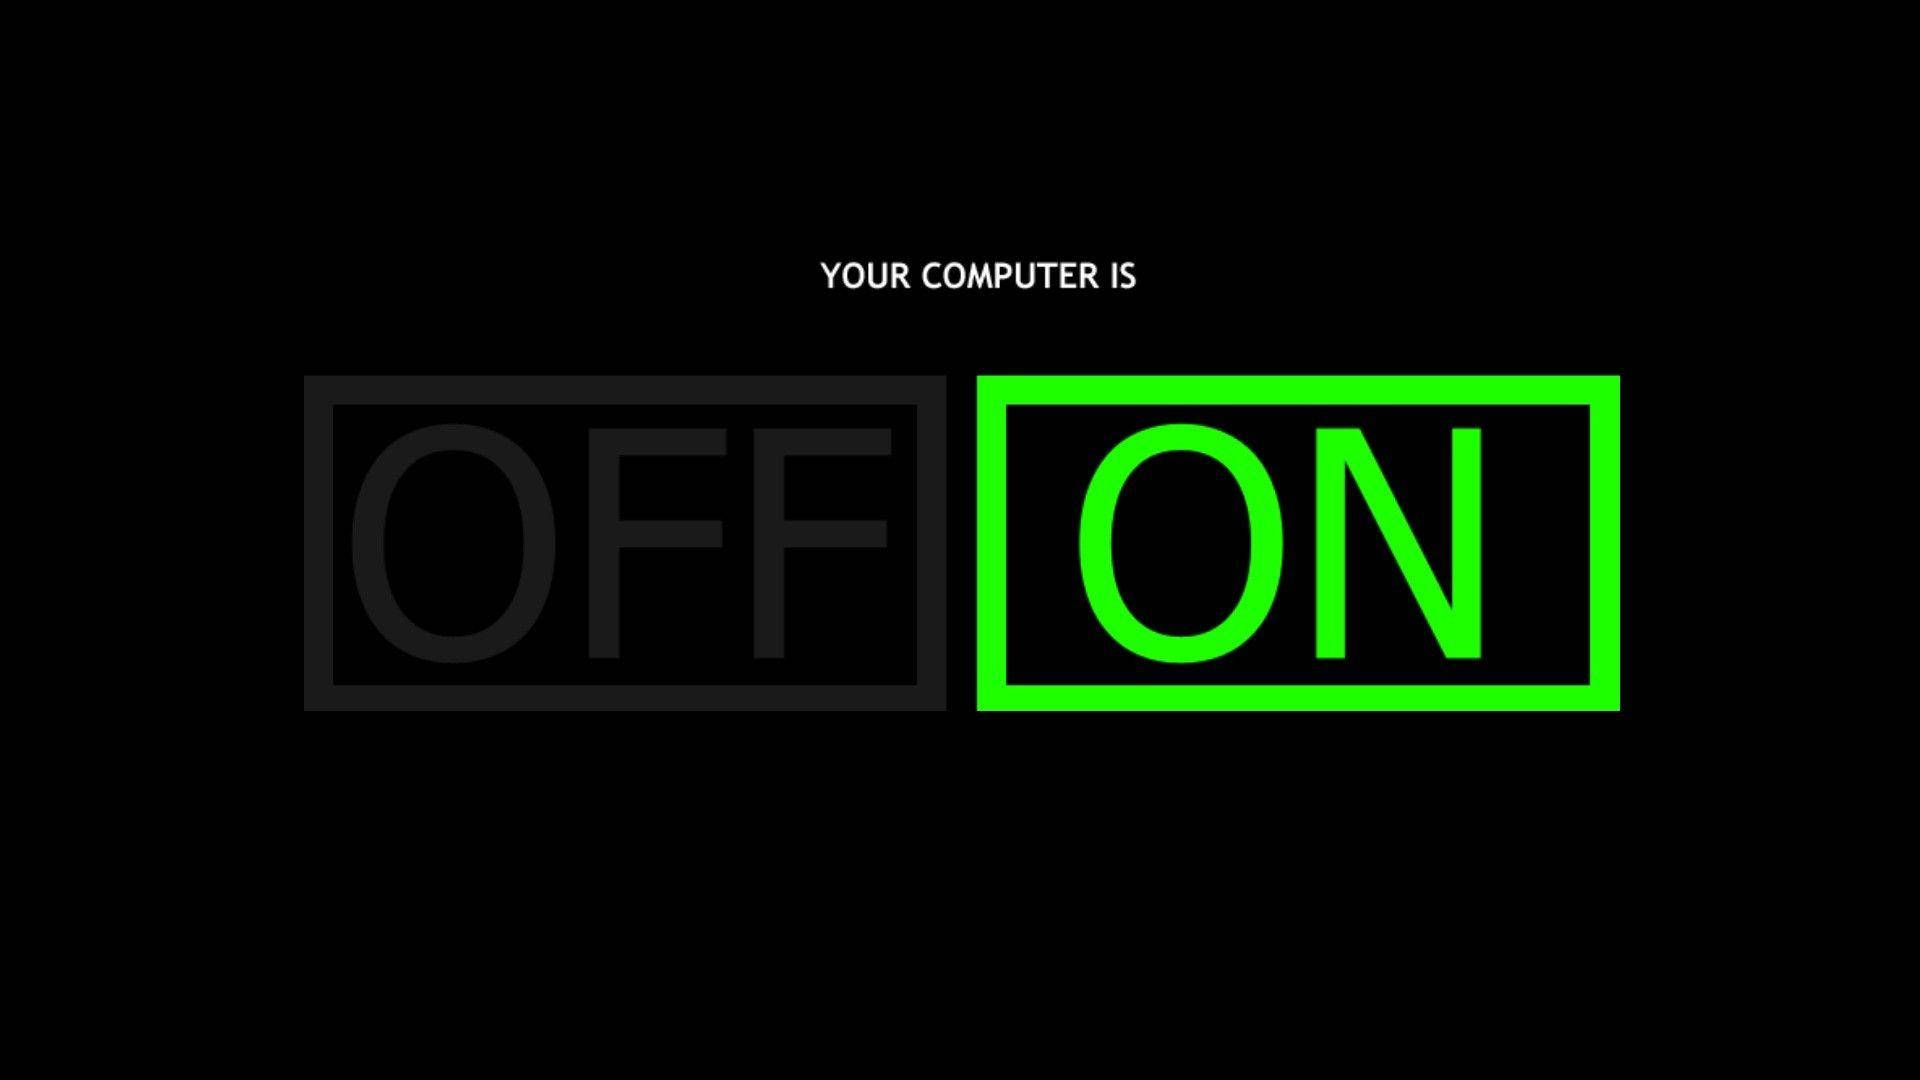 Switch Computer Off And On Meme Wallpaper